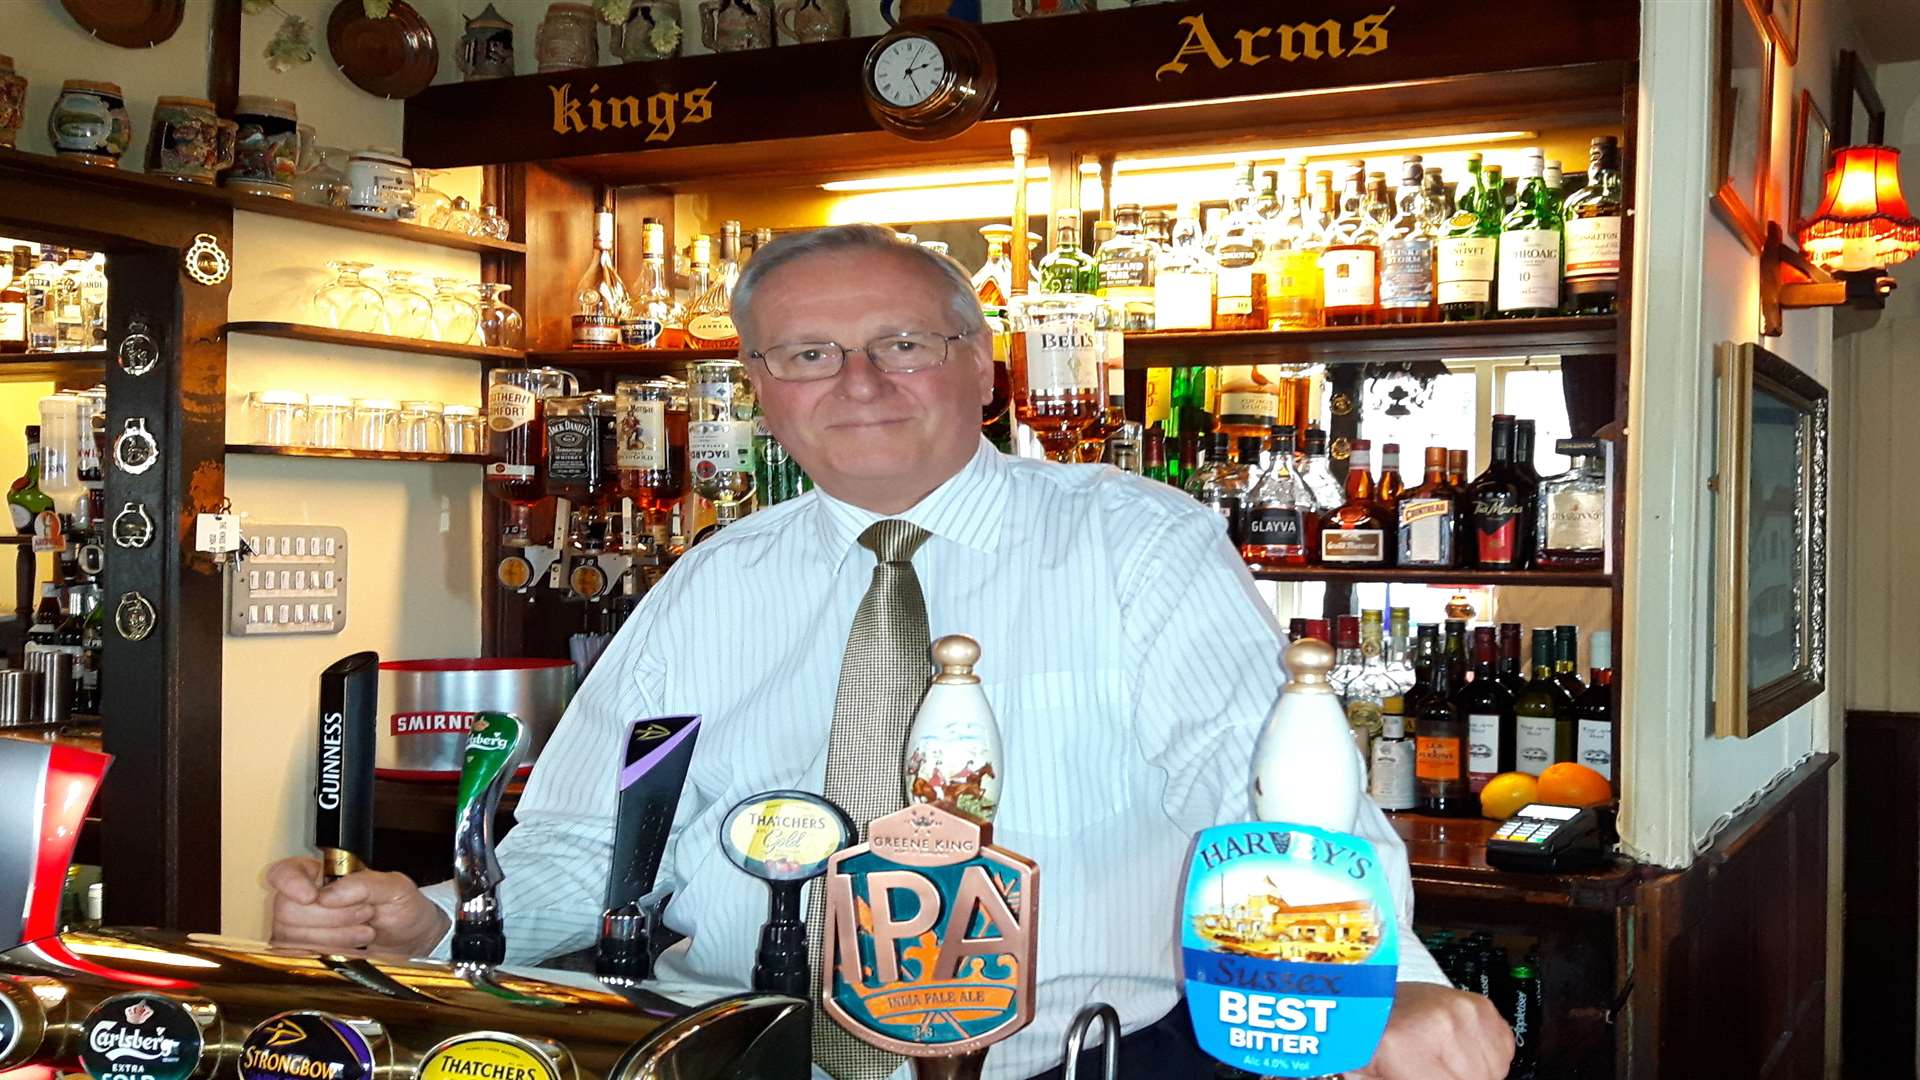 Landlord of The King's Arms, Richard Beard, has already sold every room in the hotel despite the event being three years away